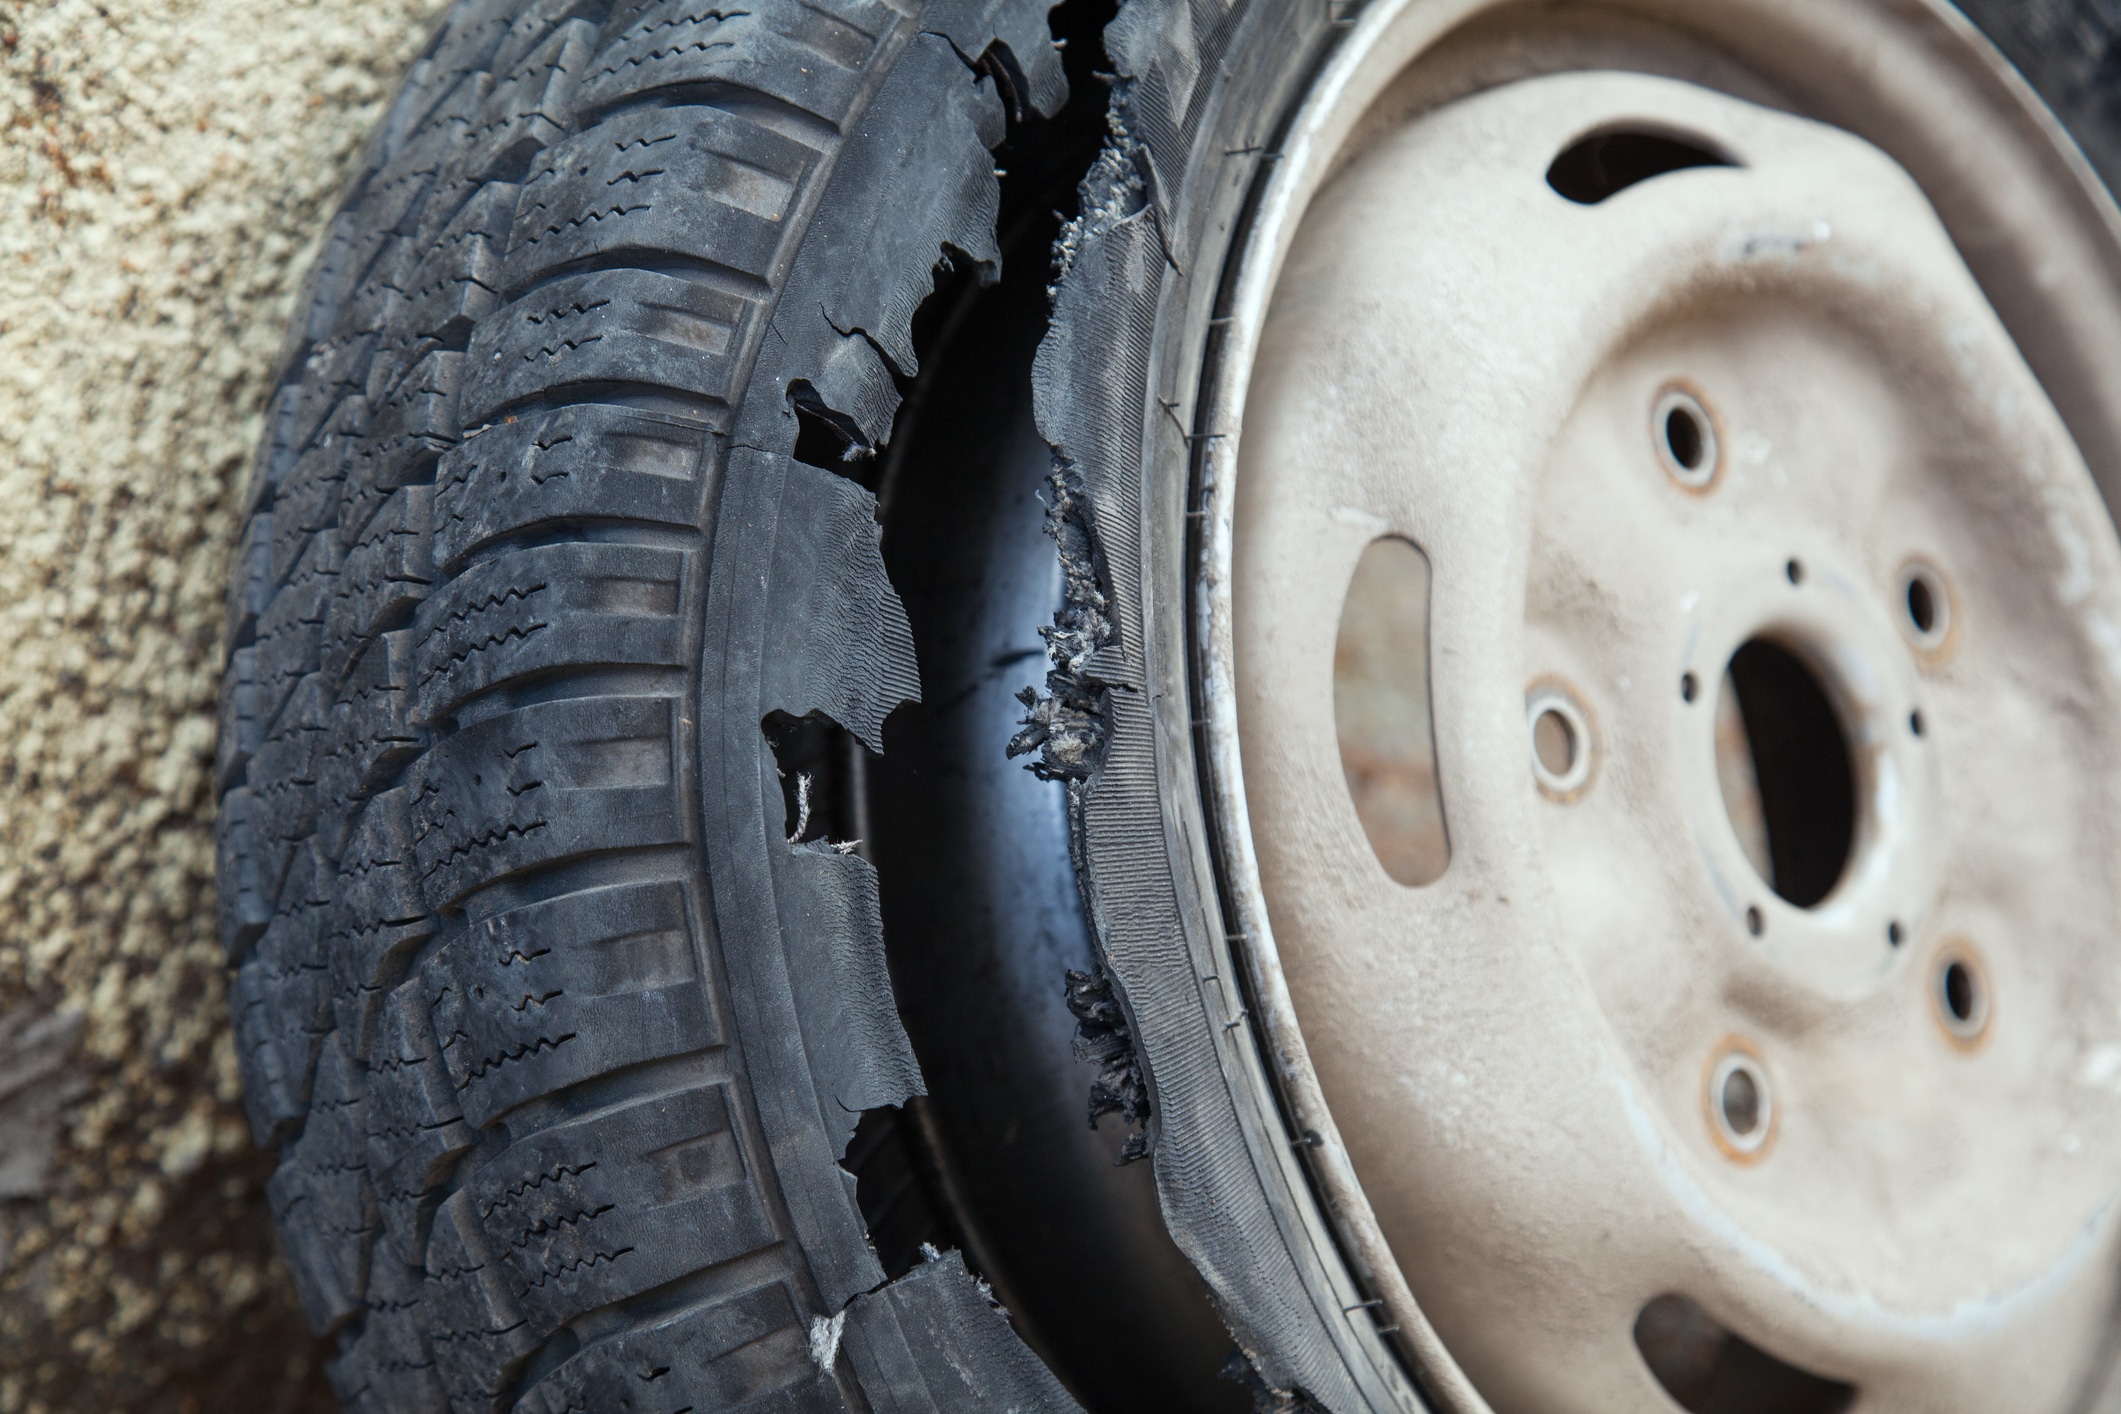 If You Were Injured in a Car Accident Caused by Defective Tires Then You May Have Grounds for a Personal Injury Case